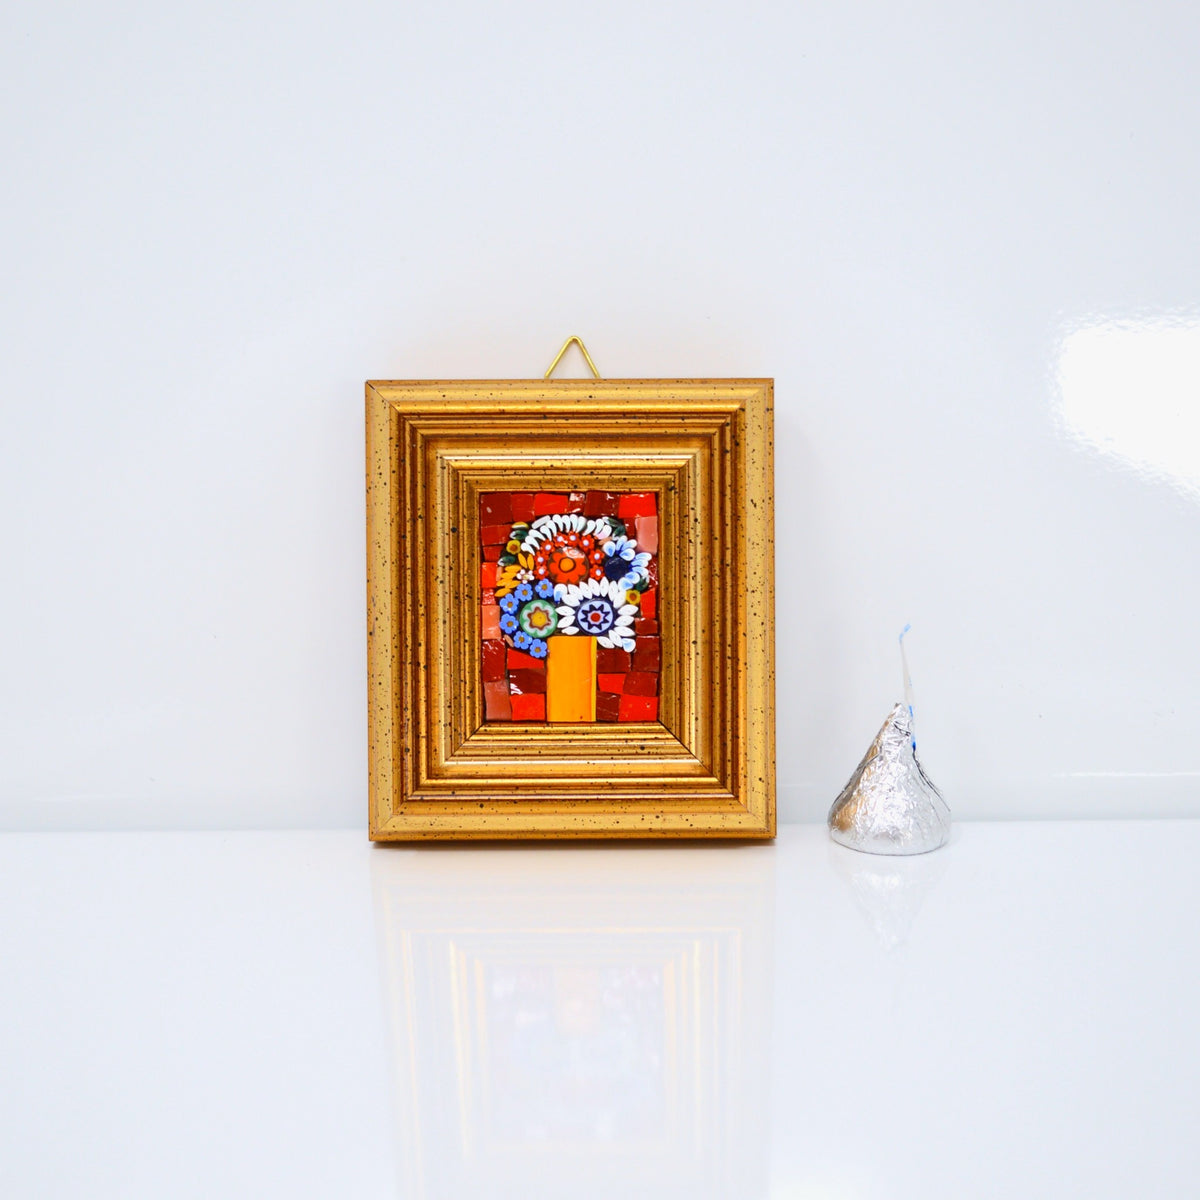 Miniature Framed Glass Floral Mosaic Art, Murano Glass, Red, Made in Italy - My Italian Decor